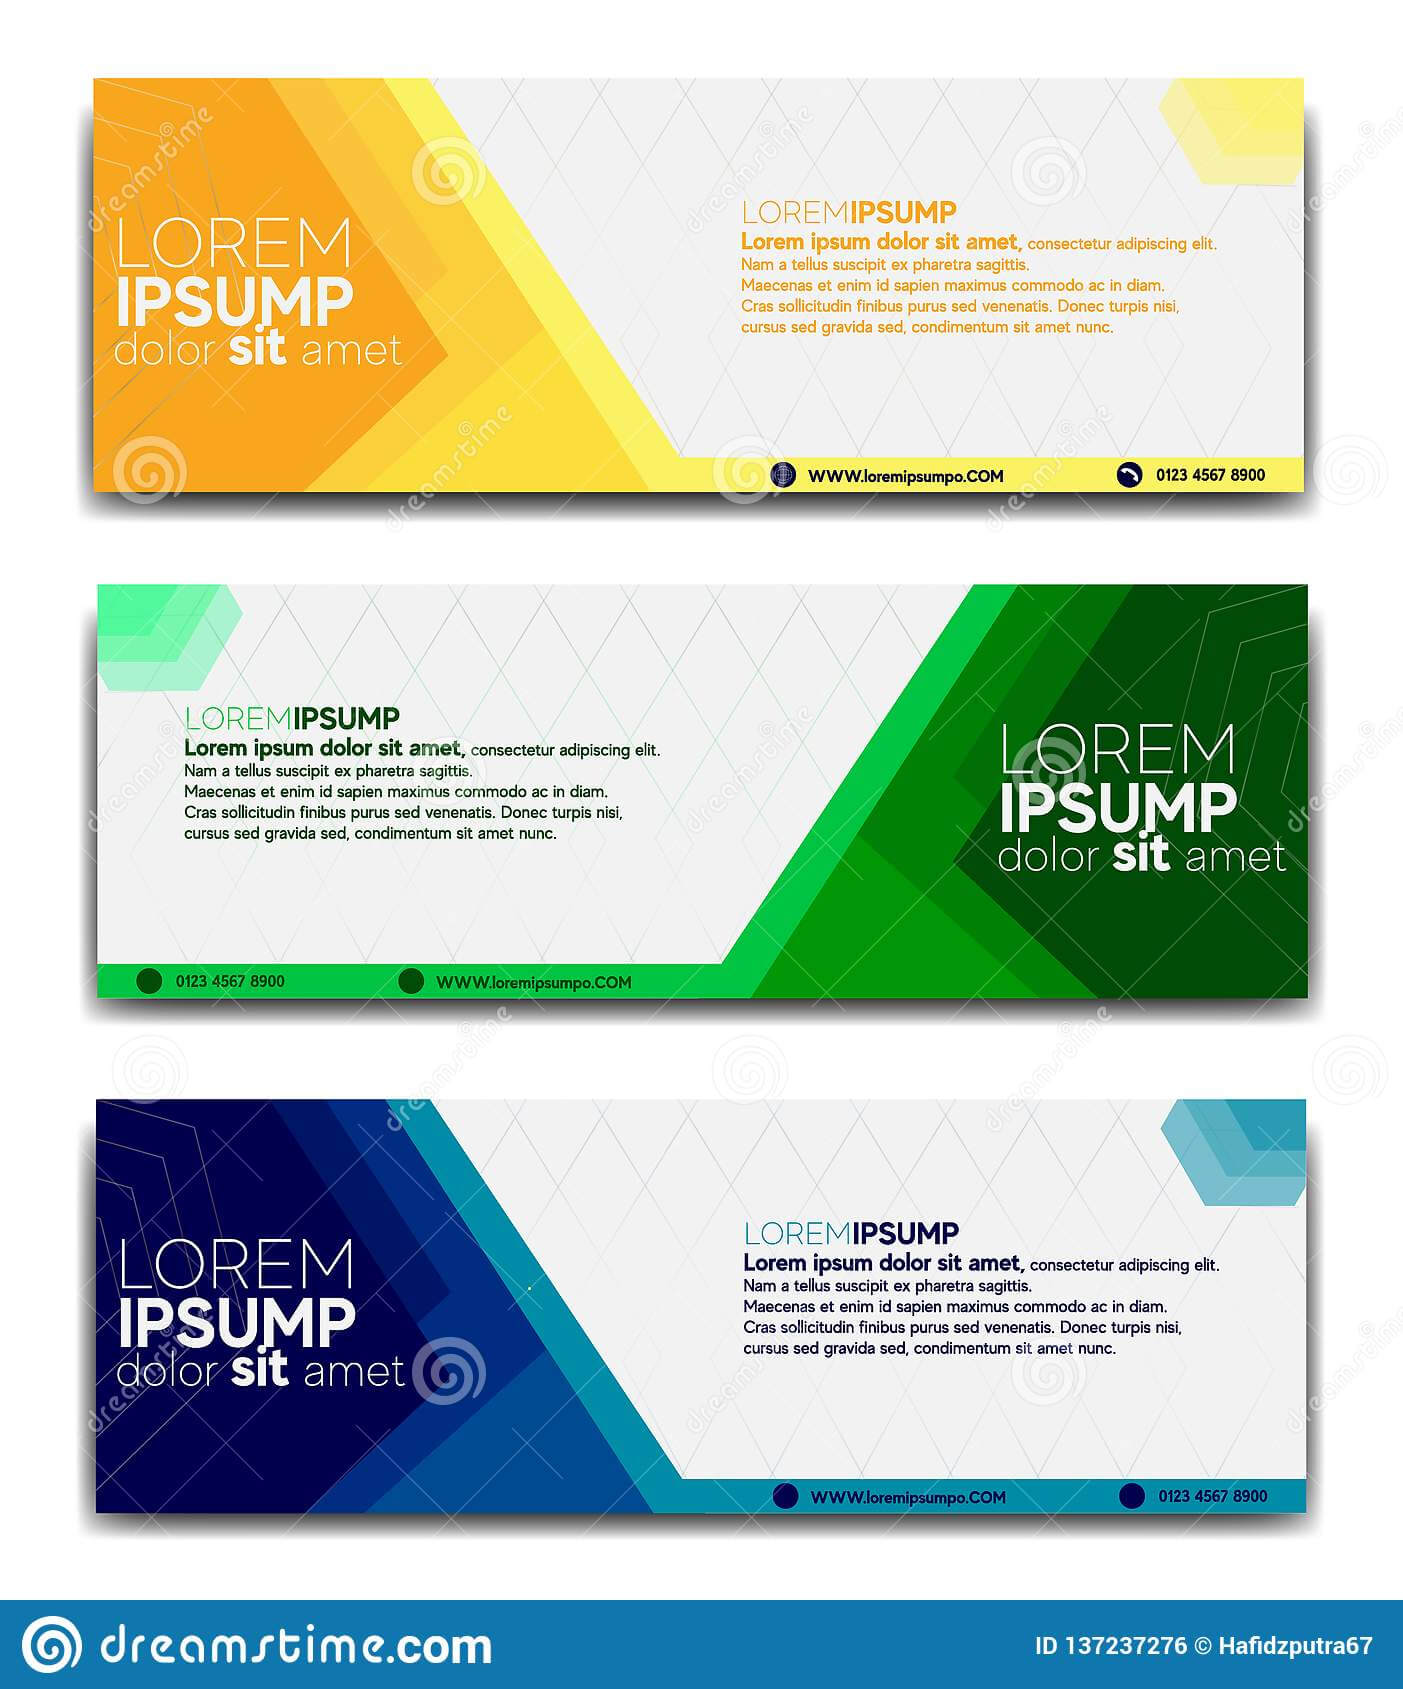 Promotional Banner Design Template 2019 Stock Vector With Website Banner Design Templates